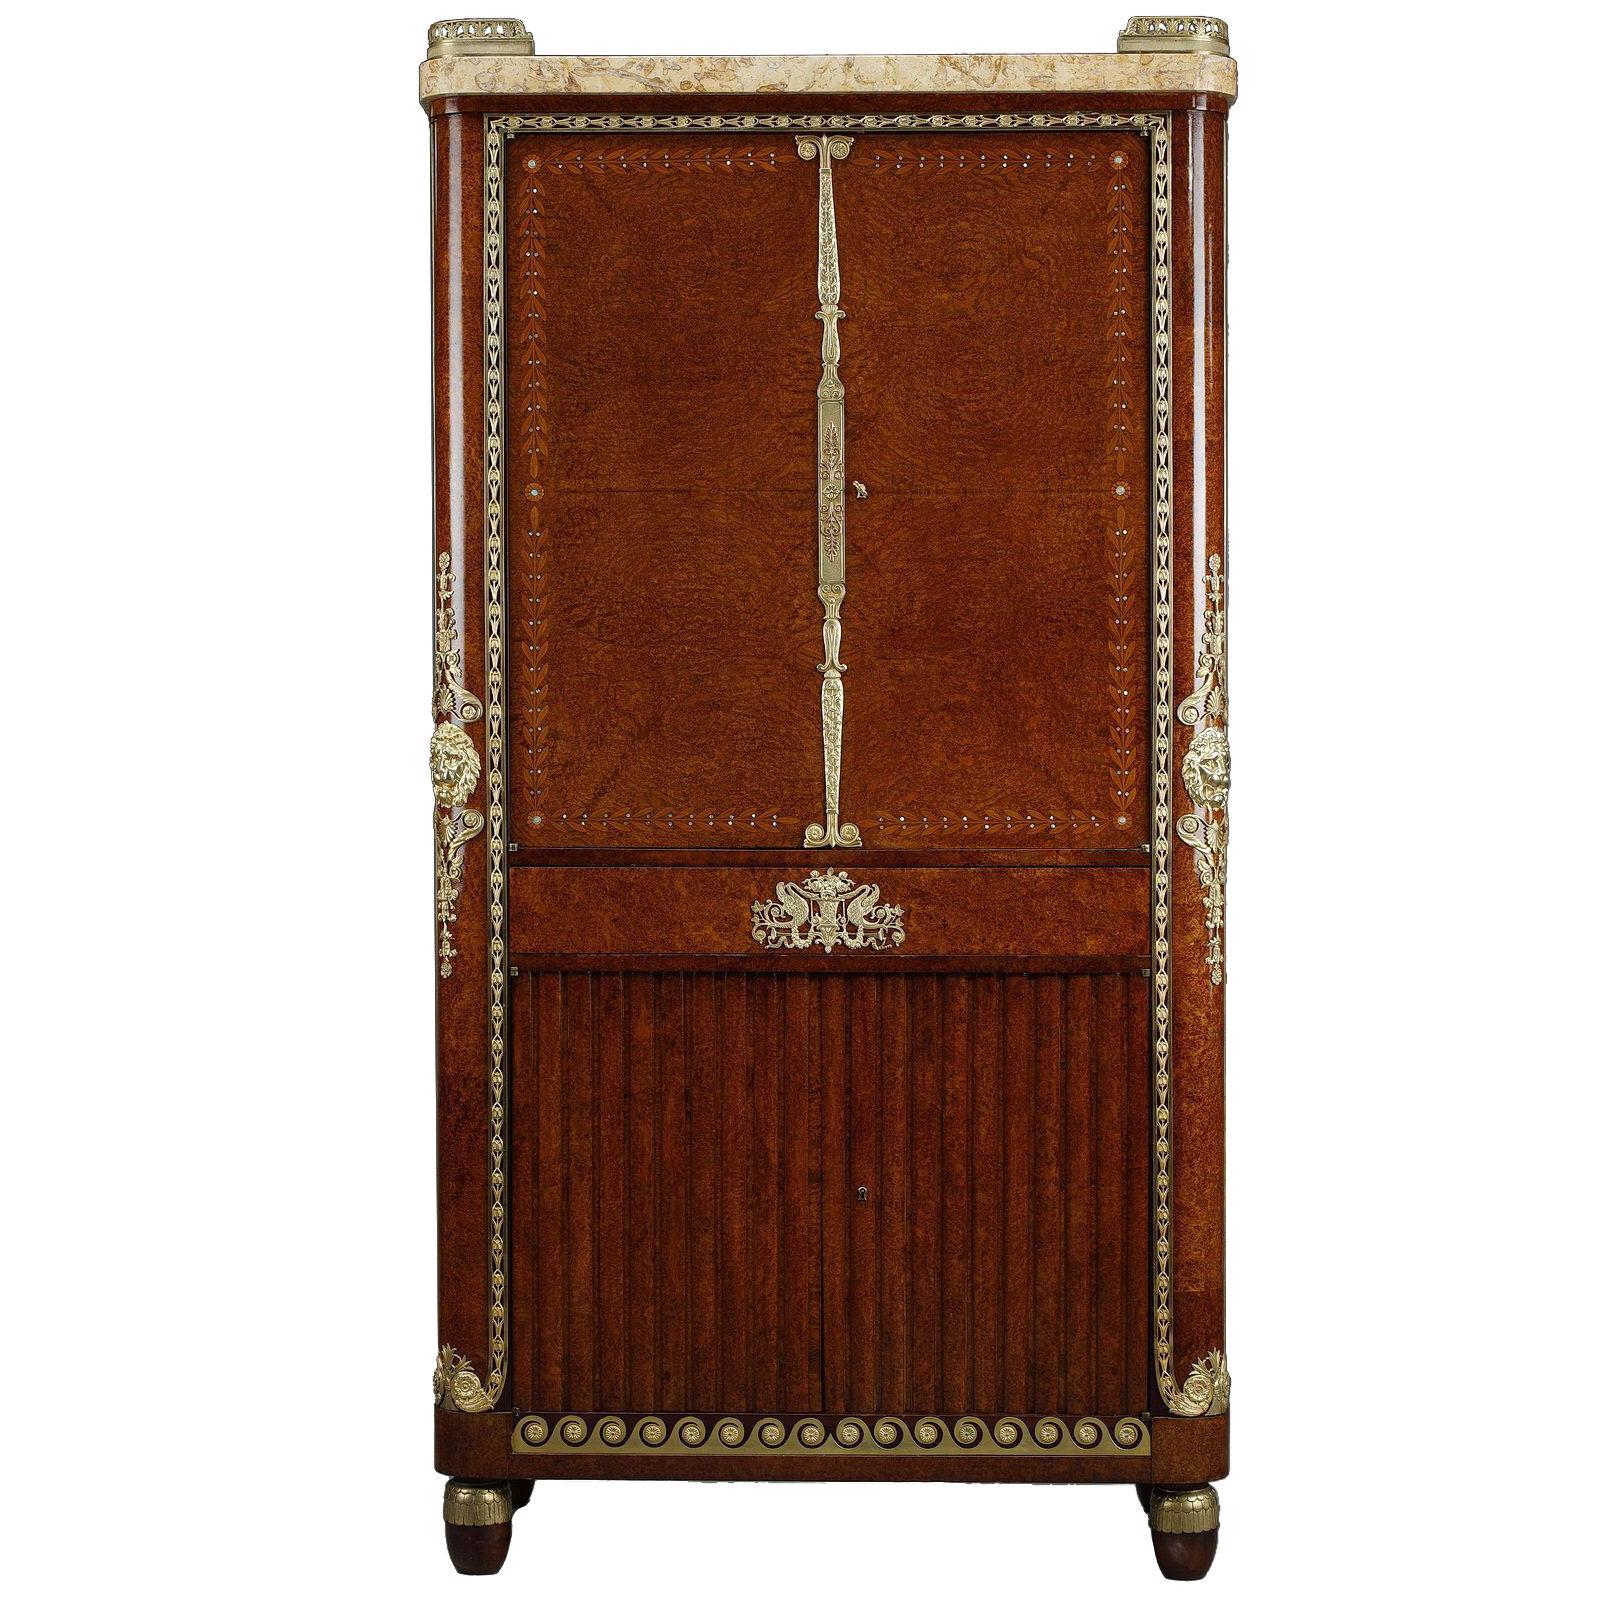 Restauration Period Collector's cabinet with gilt bronze decorations